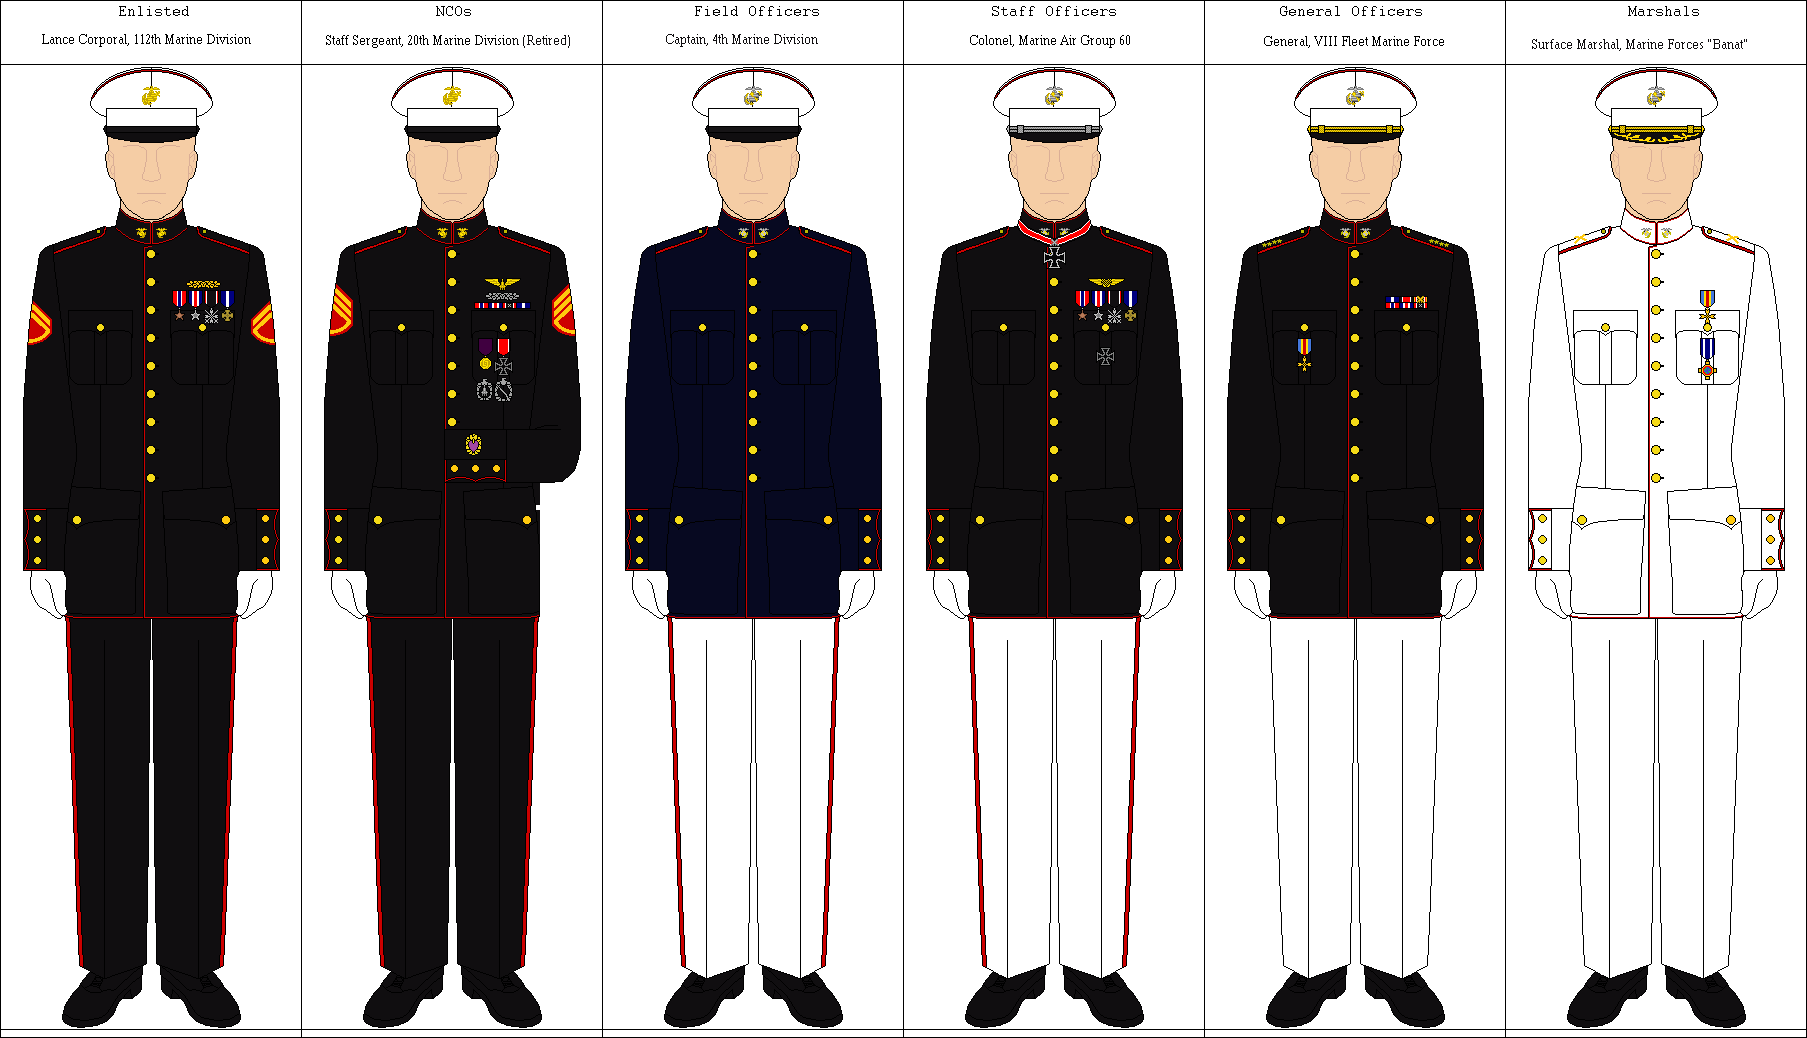 Rank Insignia and Uniforms Thread | Page 82 | Alternate History Discussion1807 x 1038